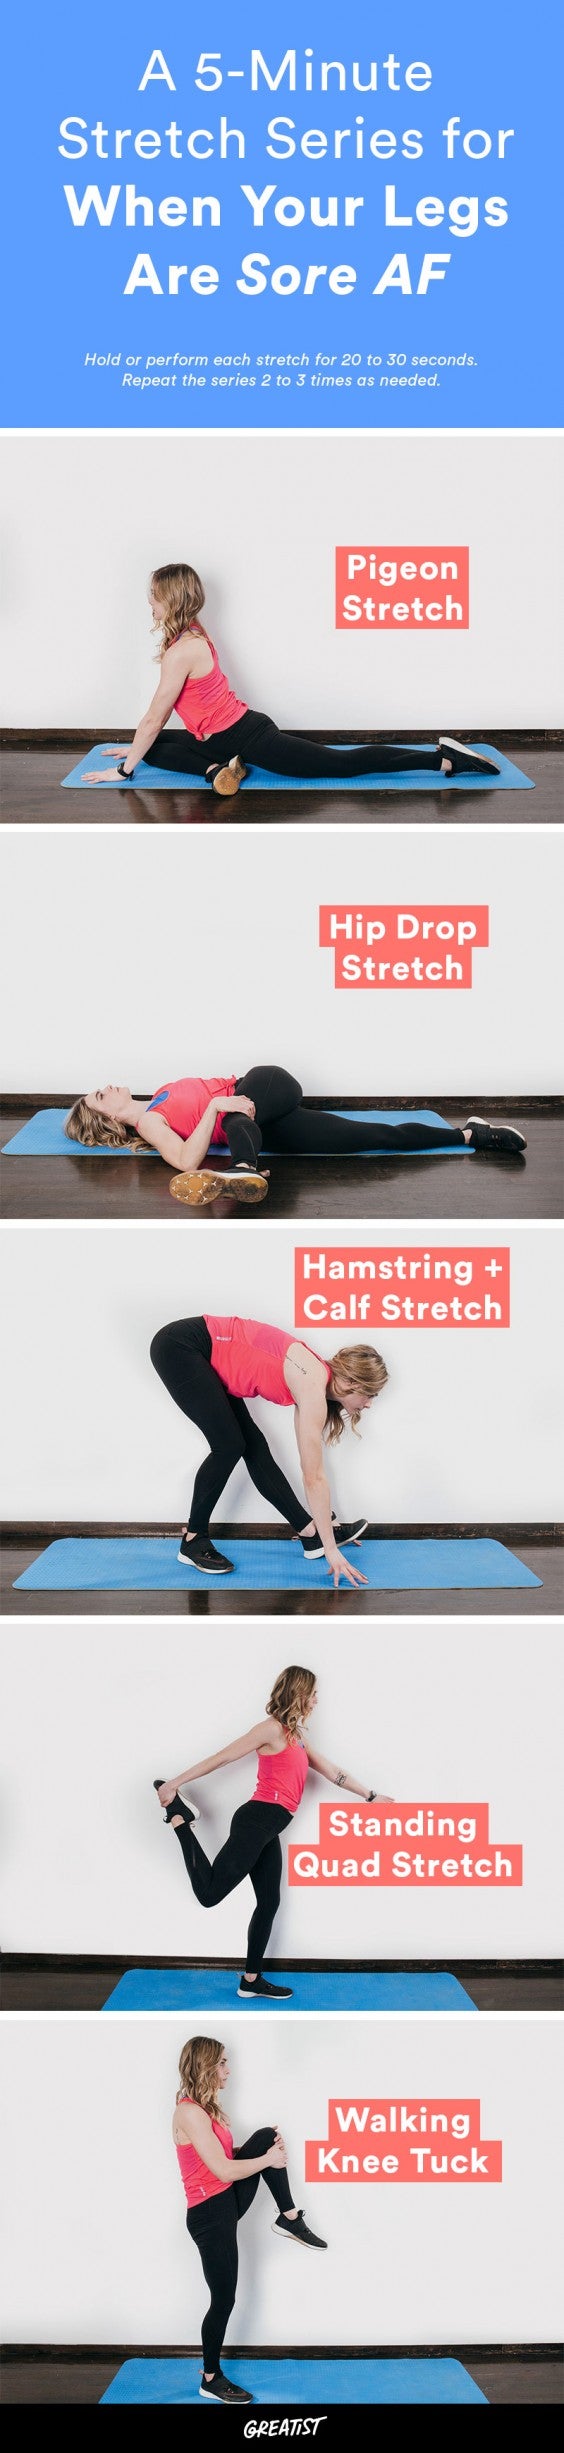 Lower Body Stretches Warmup And Cooldown Stretches For Your Legs